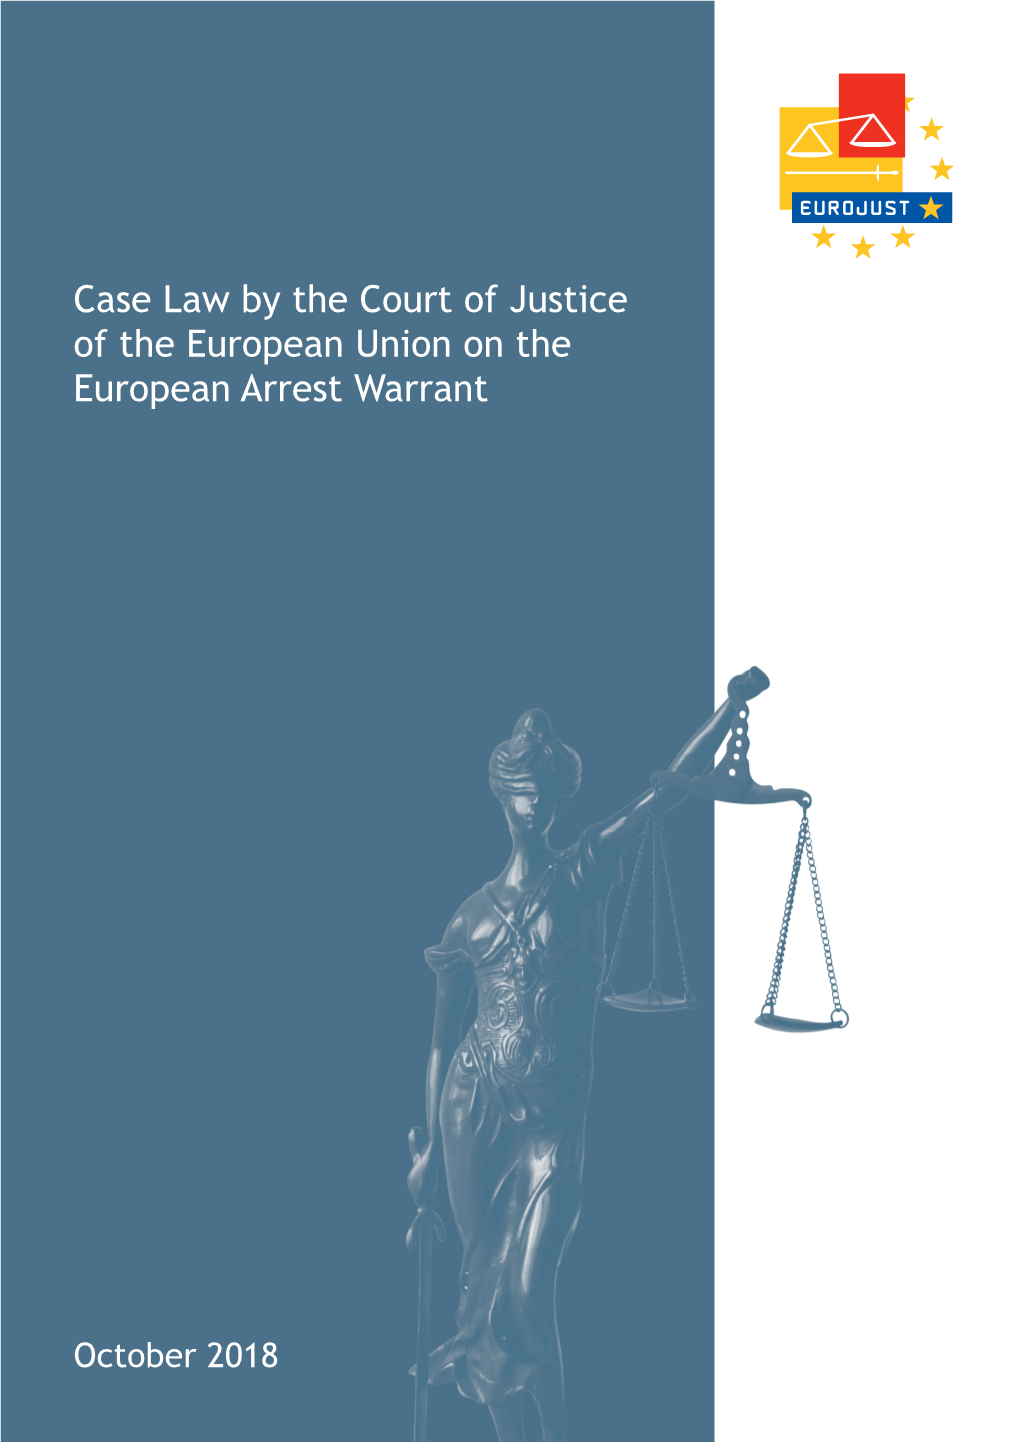 Case Law by the Court of Justice of the EU on the European Arrest Warrant